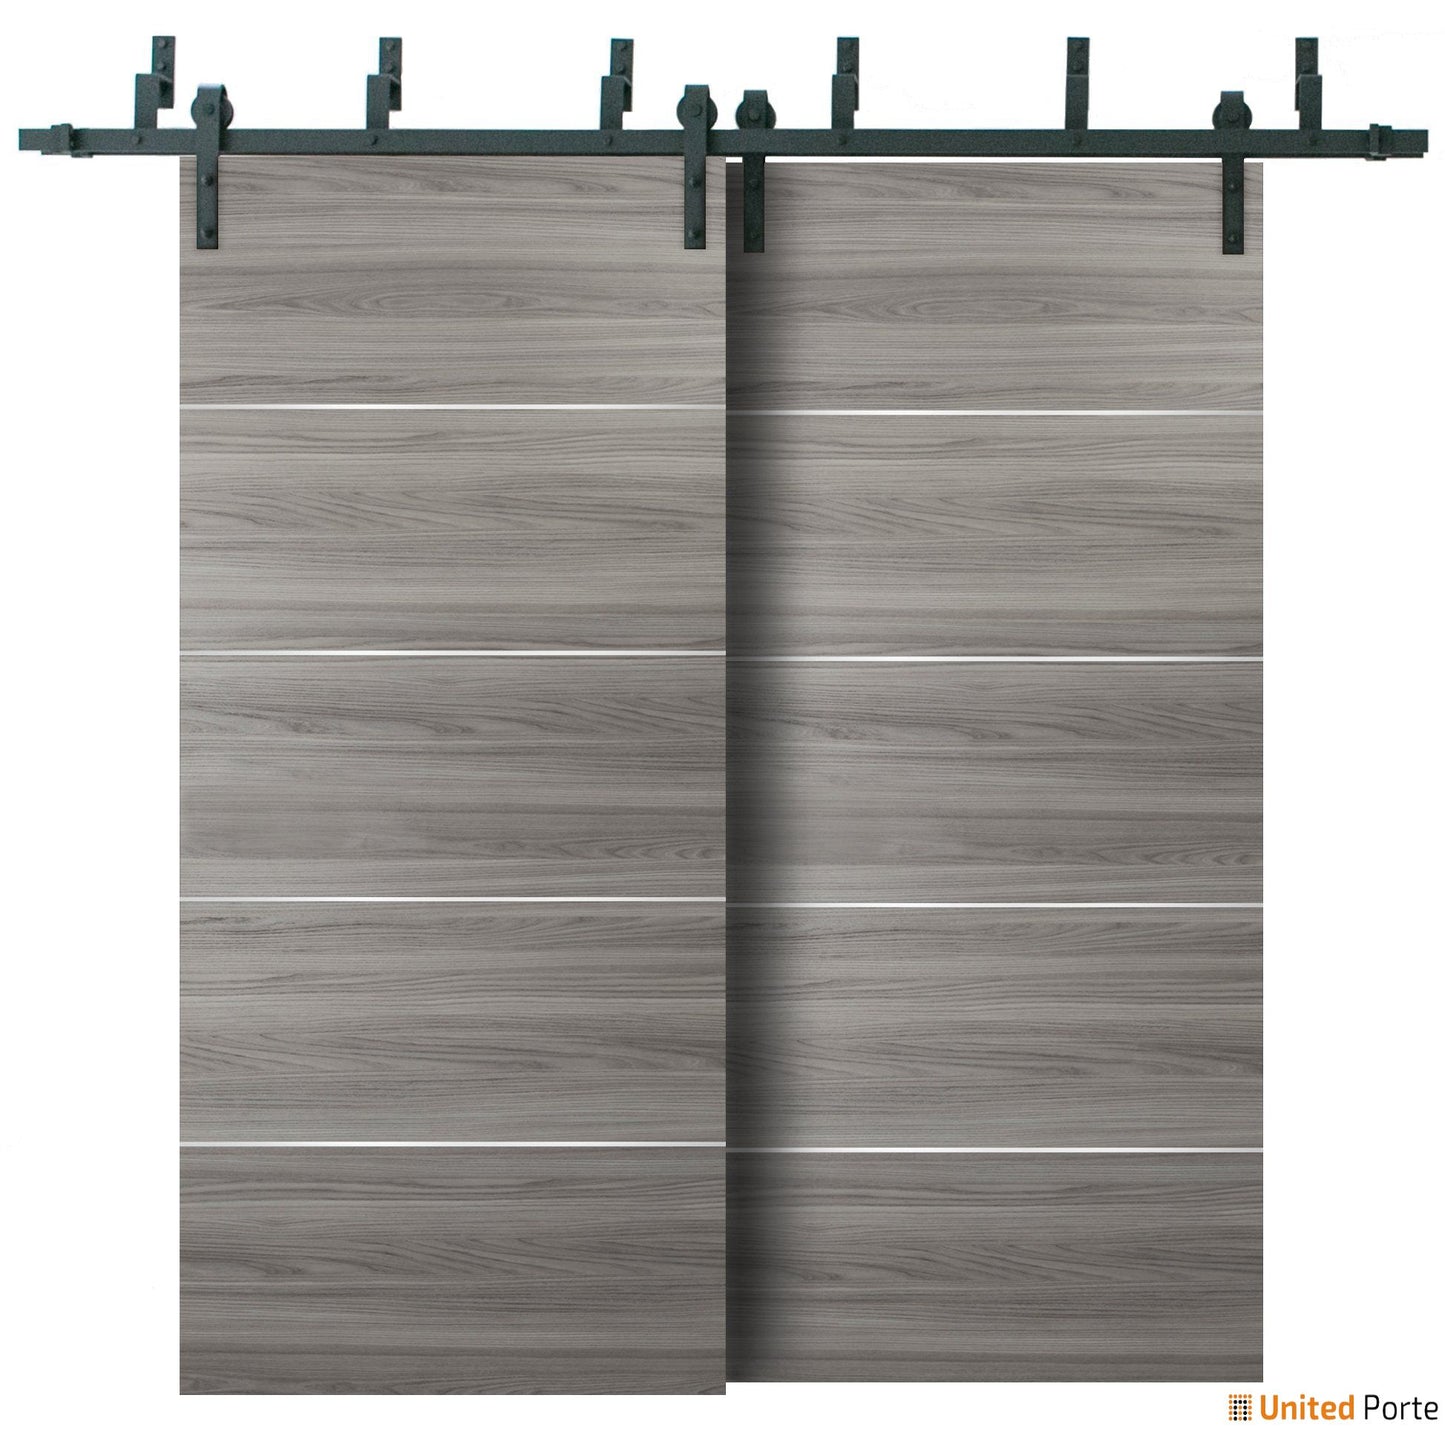 Planum 0020 Ginger Ash Double Barn Door and Black Bypass Rail